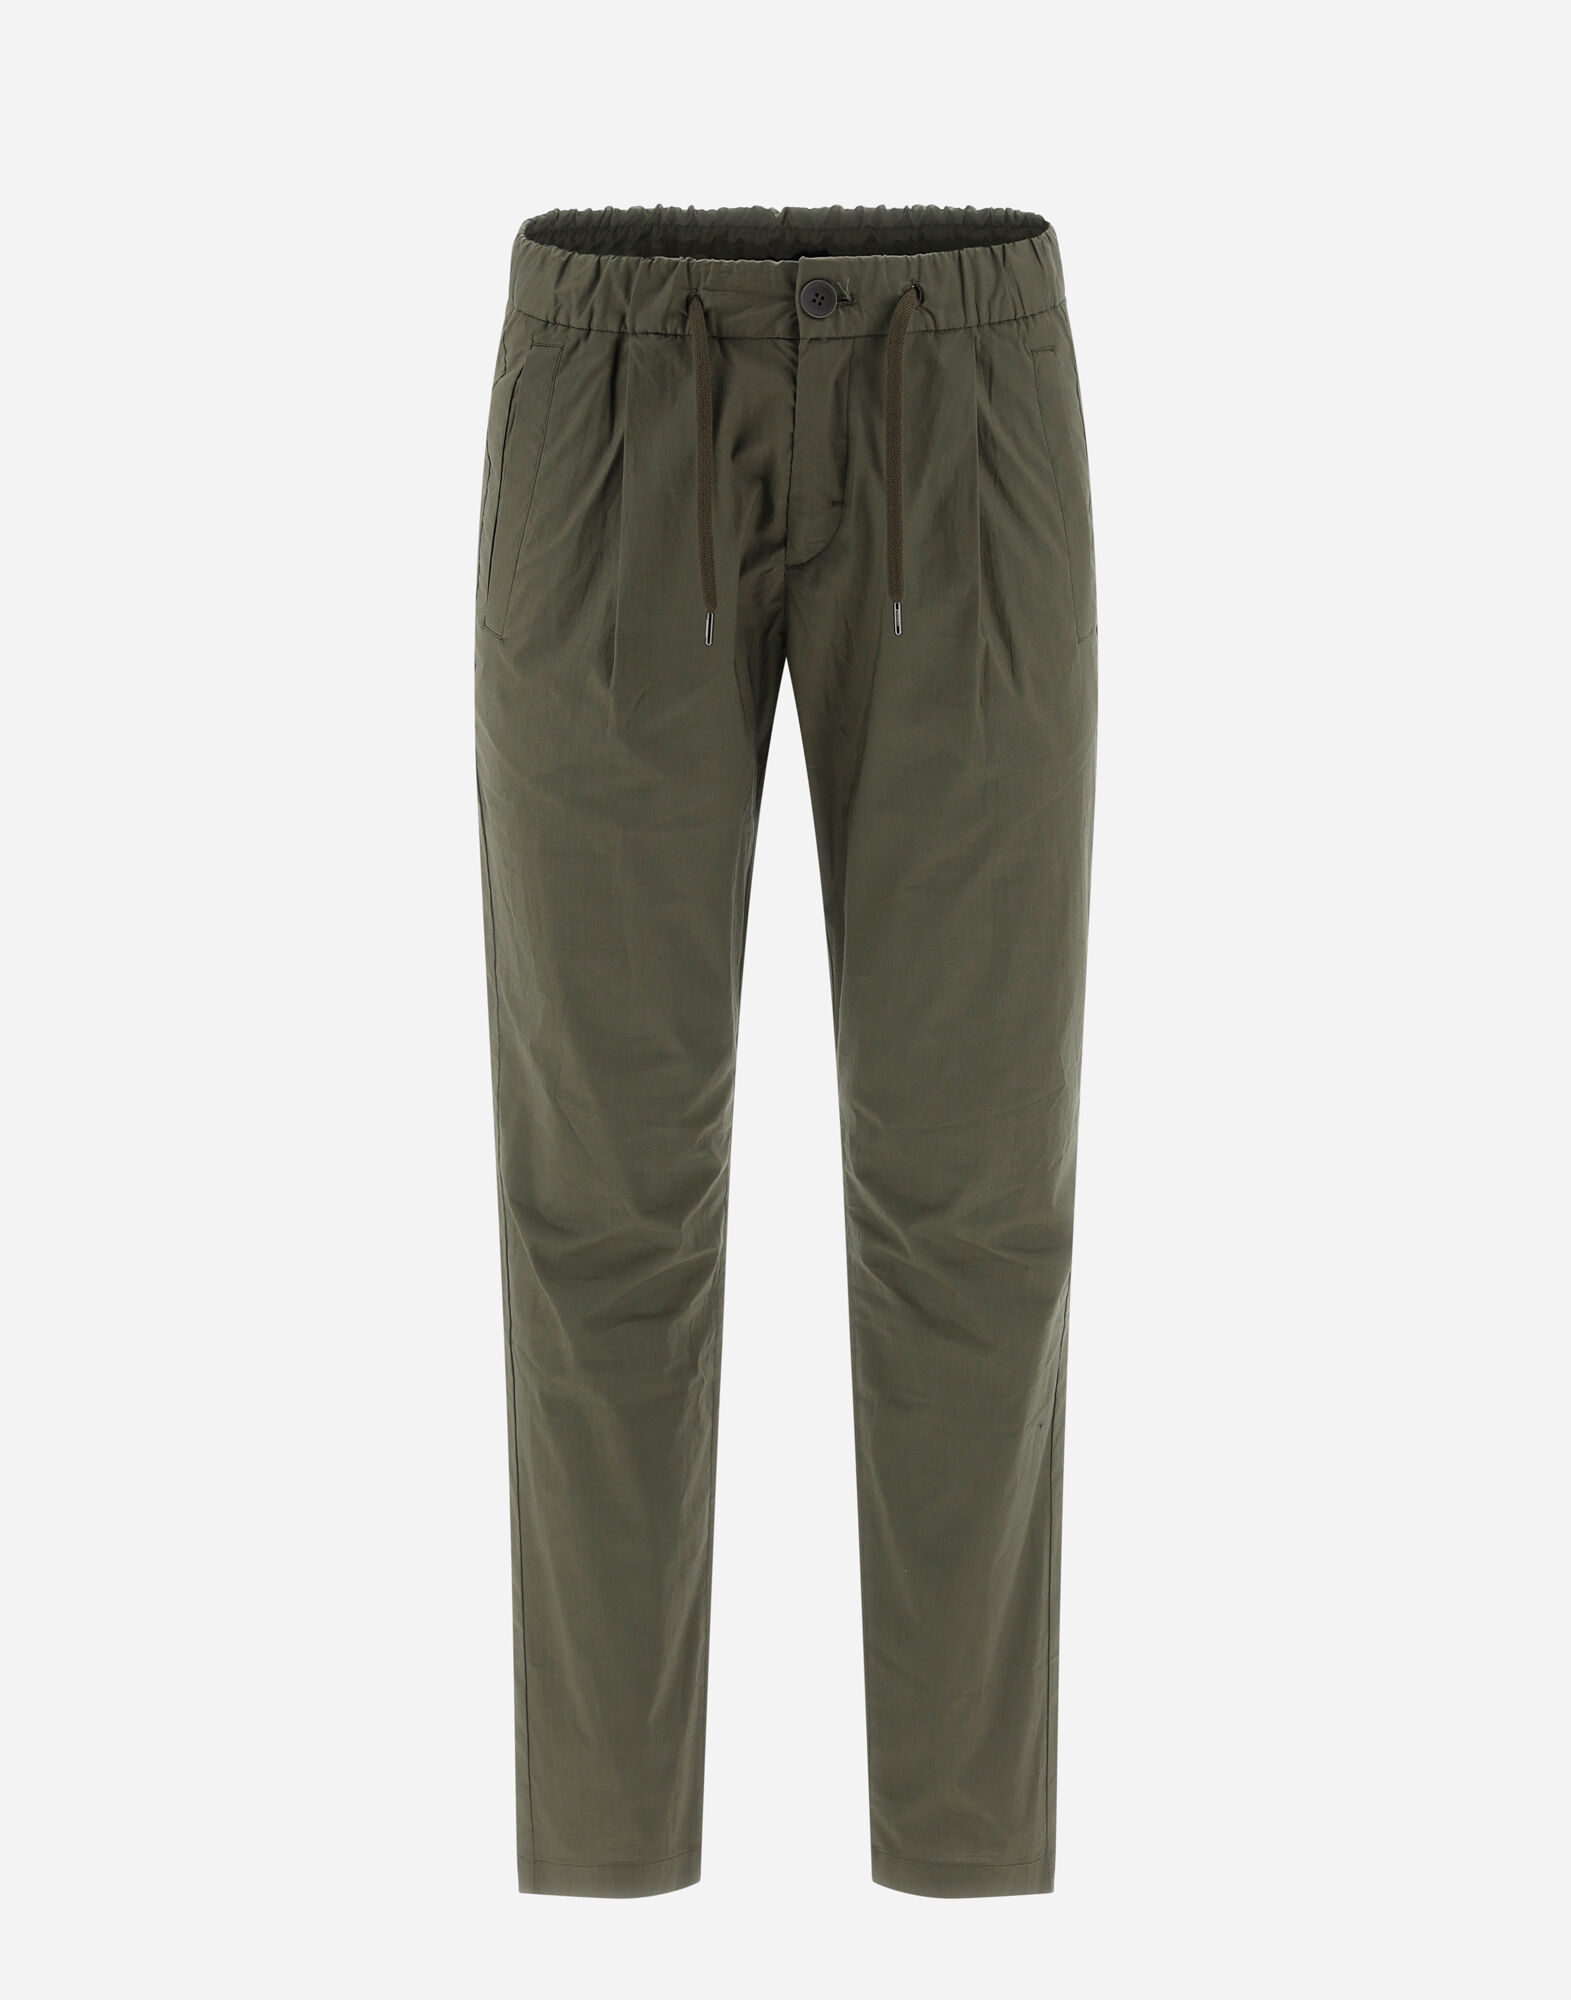 Paul Smith Slim-Fit Cotton-Stretch Chino Trousers | Liberty